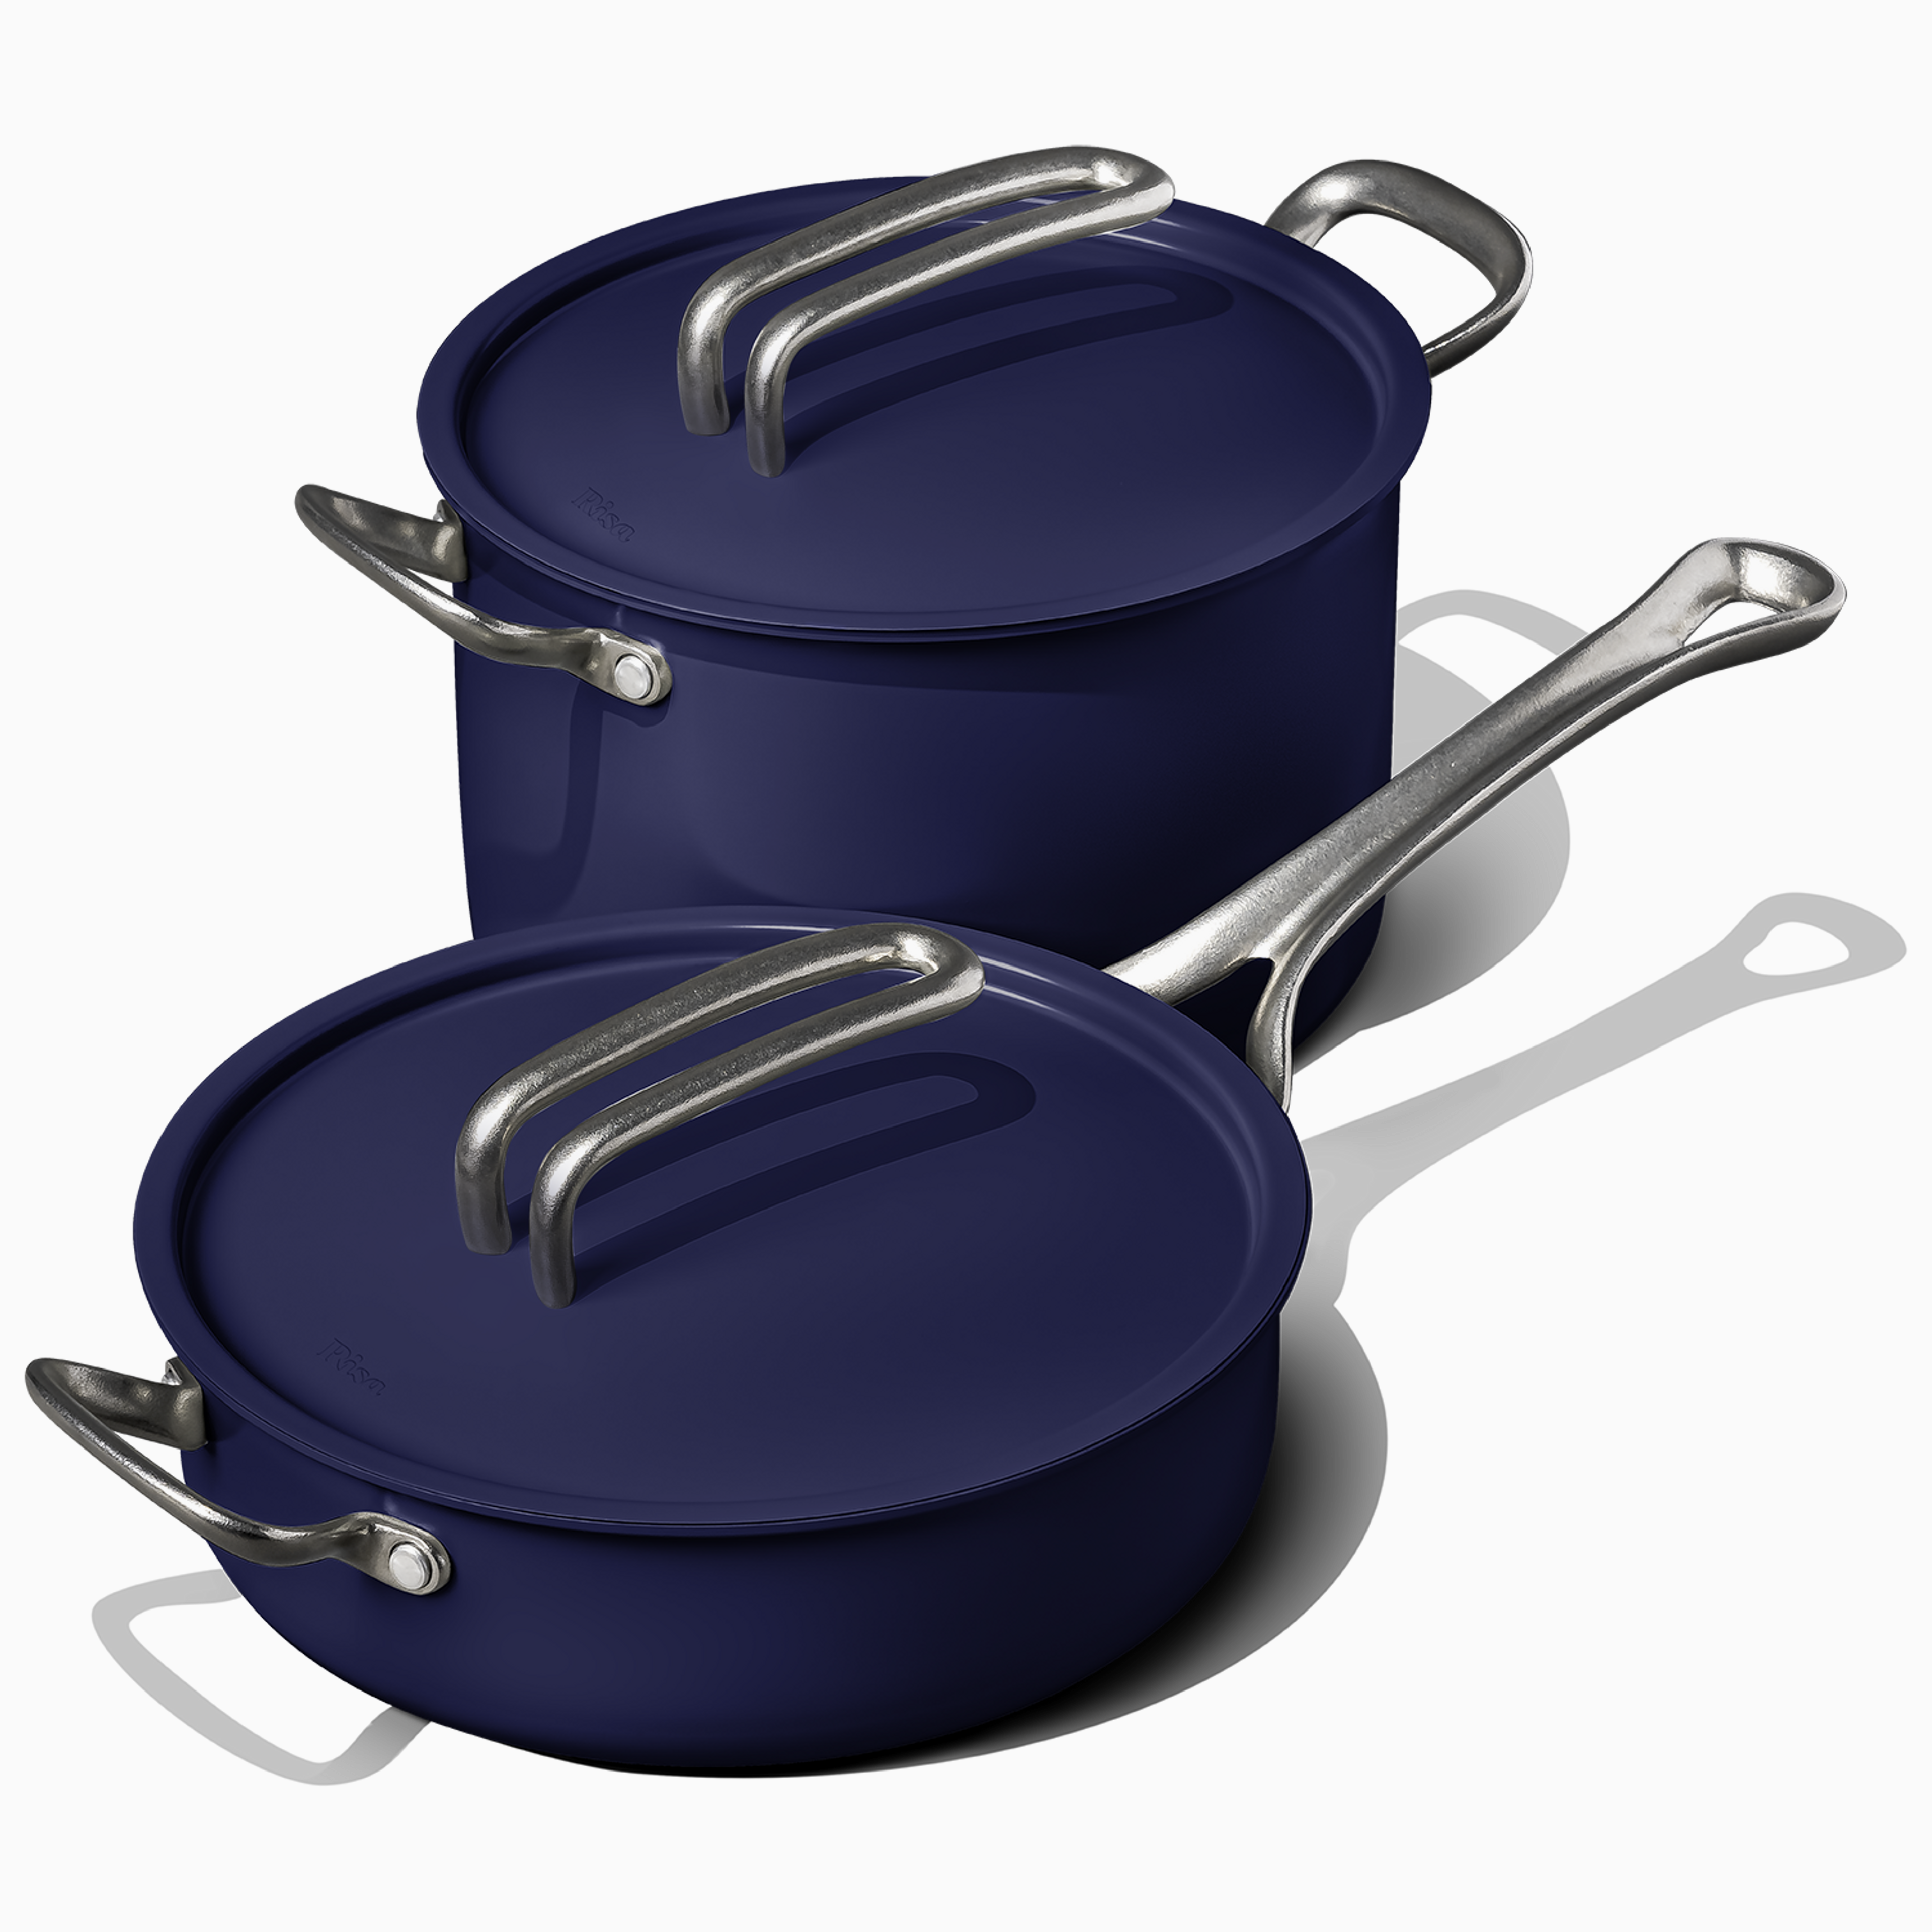 The Risa Cookware Set